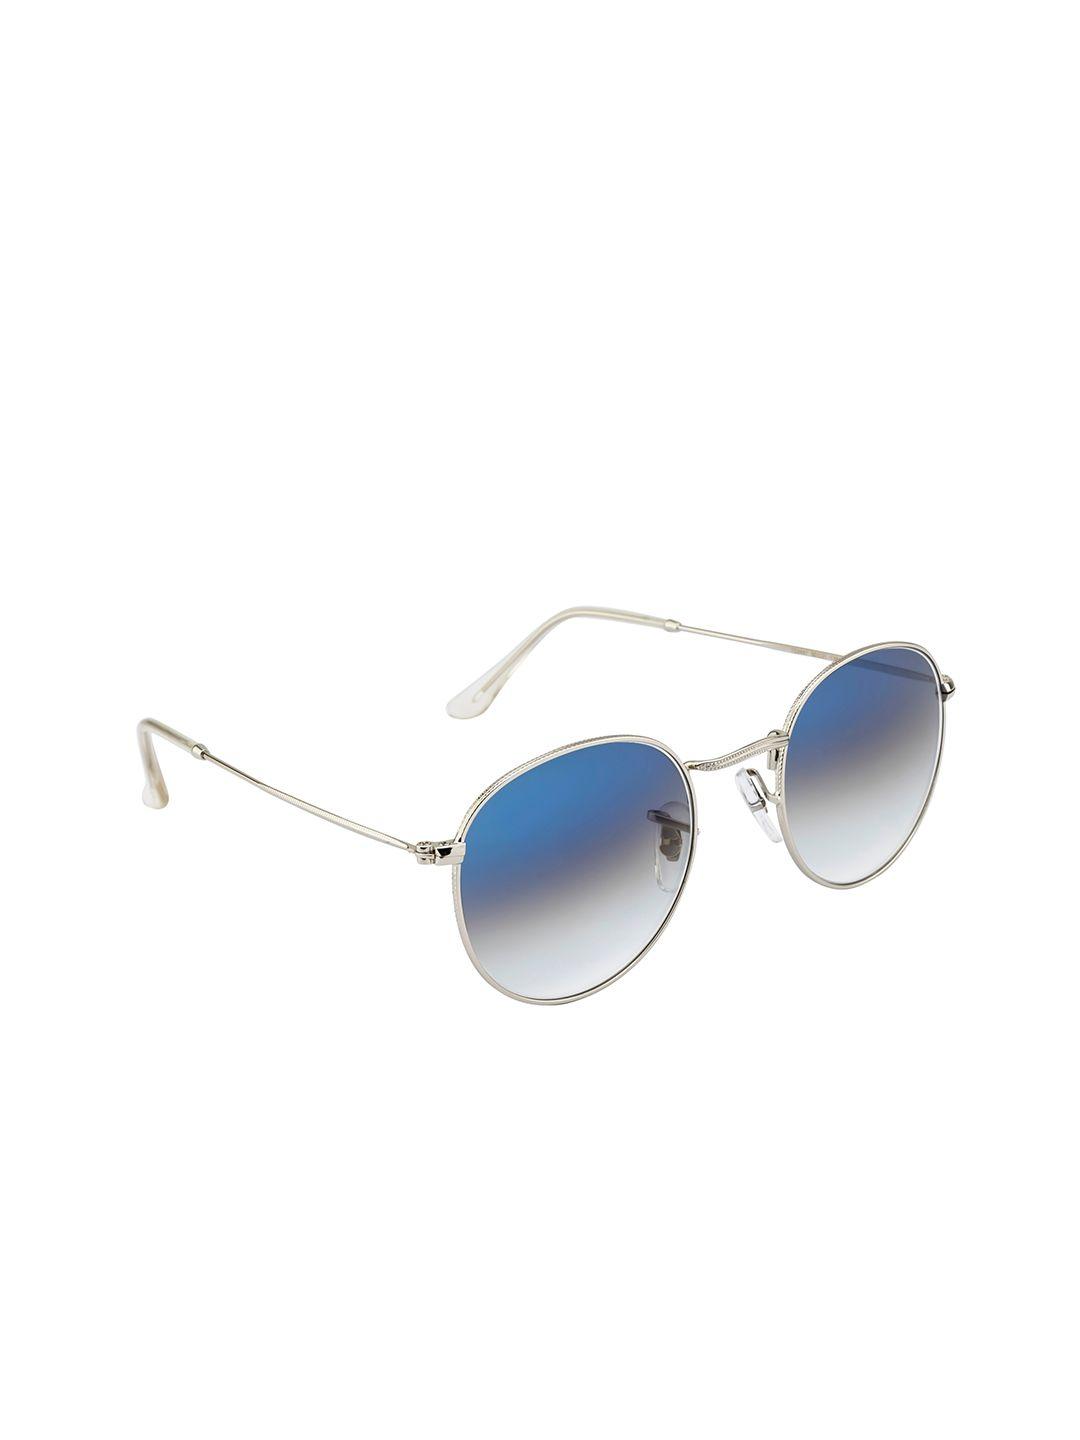 ted smith unisex blue lens & silver-toned round sunglasses lmoon_c17